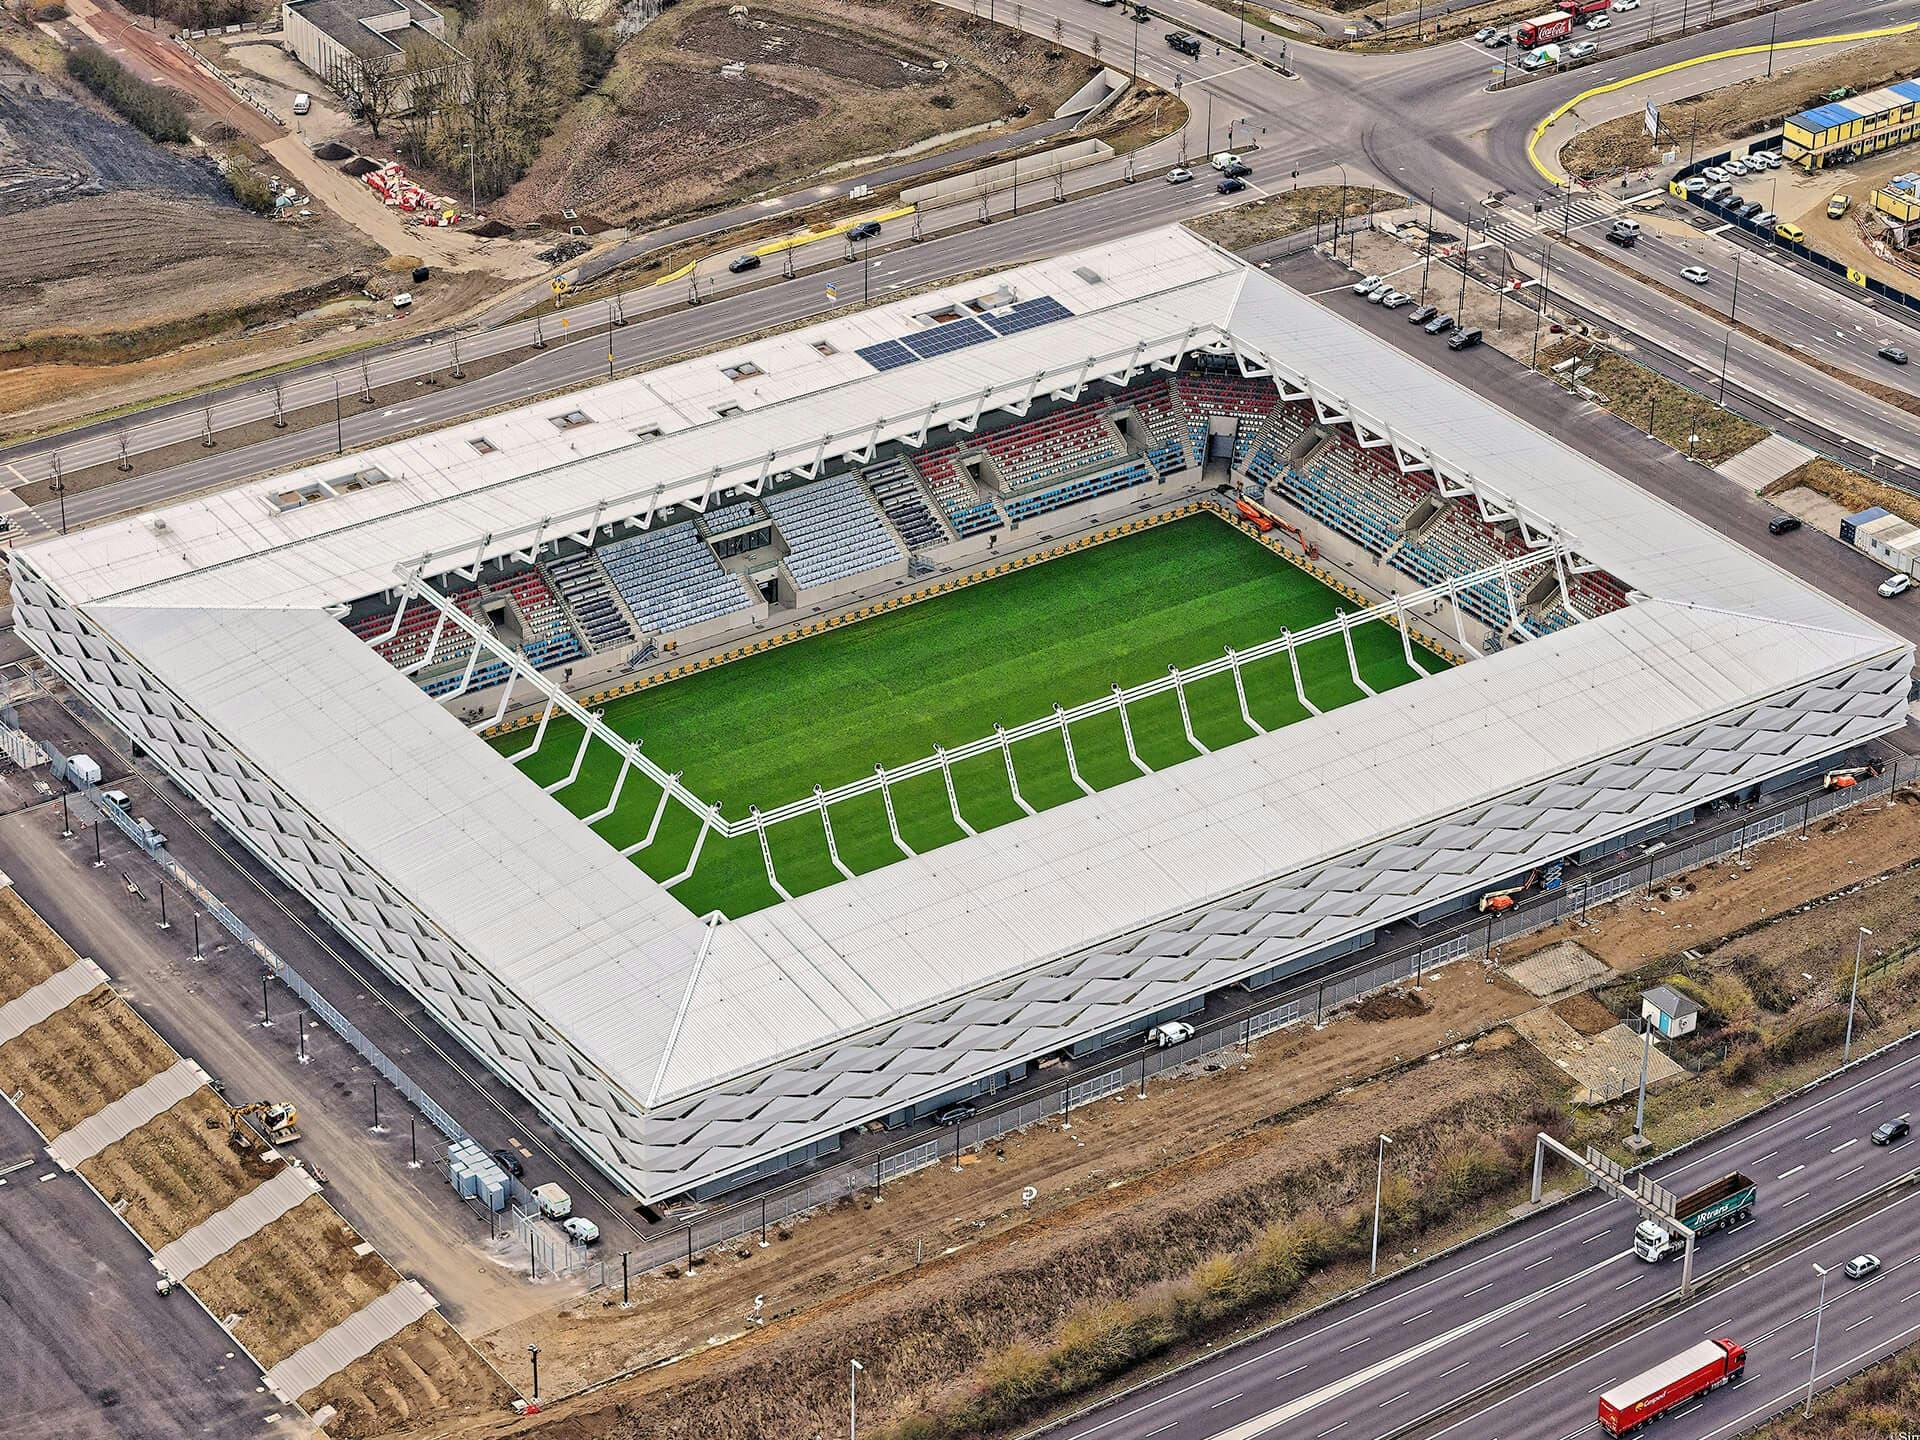 The national football and rugby stadium. A recent achievement of the Giorgetti teams.